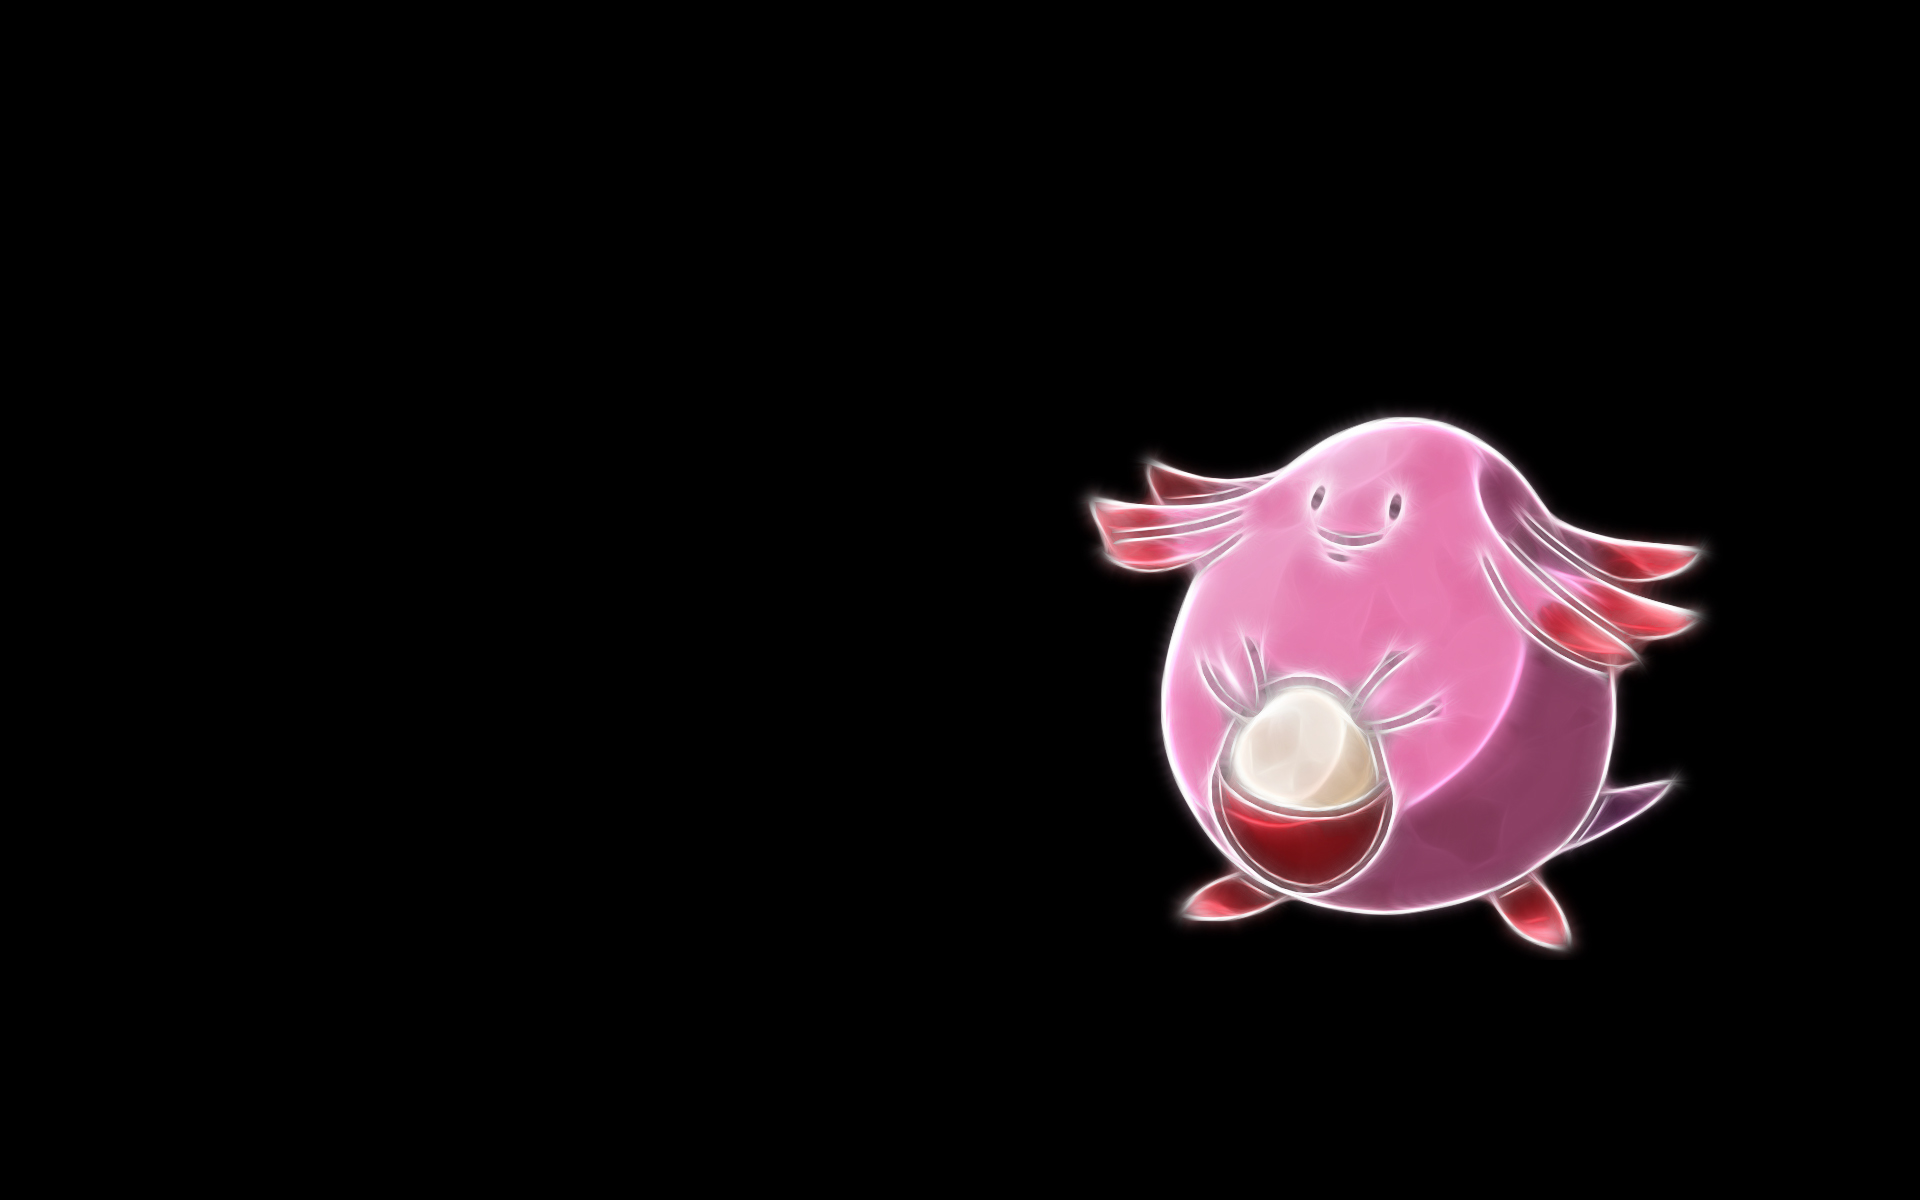 The Chansey Wallpaper iPhone